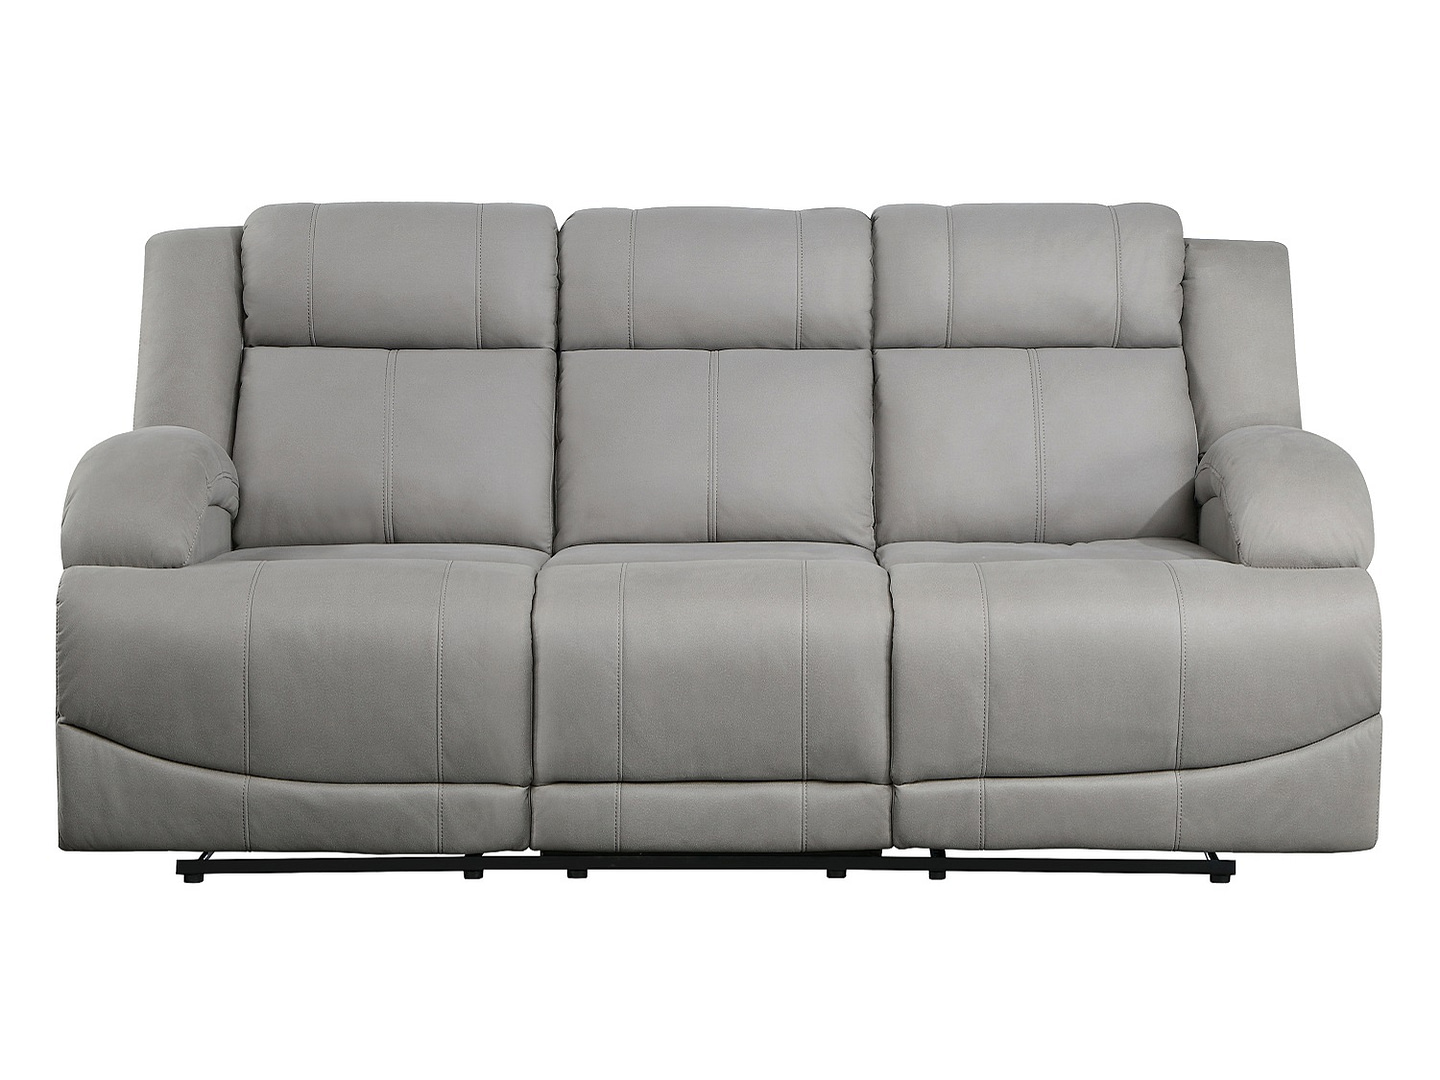 QUINCY Reclining Sofa - Front